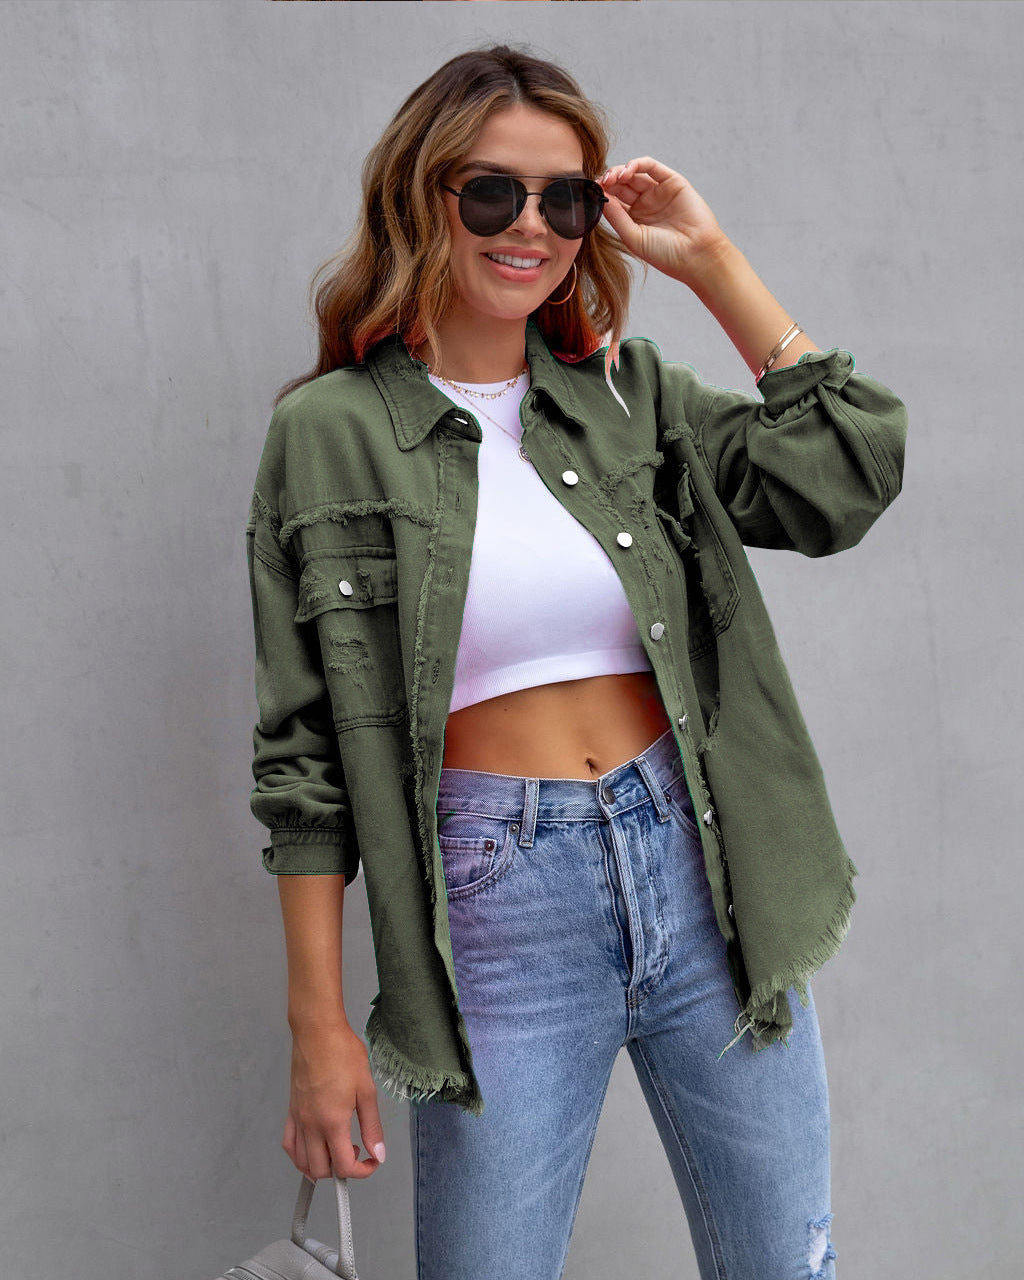 Women’s Jacket - Fashion Ripped Shirt Jacket Female Autumn And Spring Casual Tops Womens Clothing